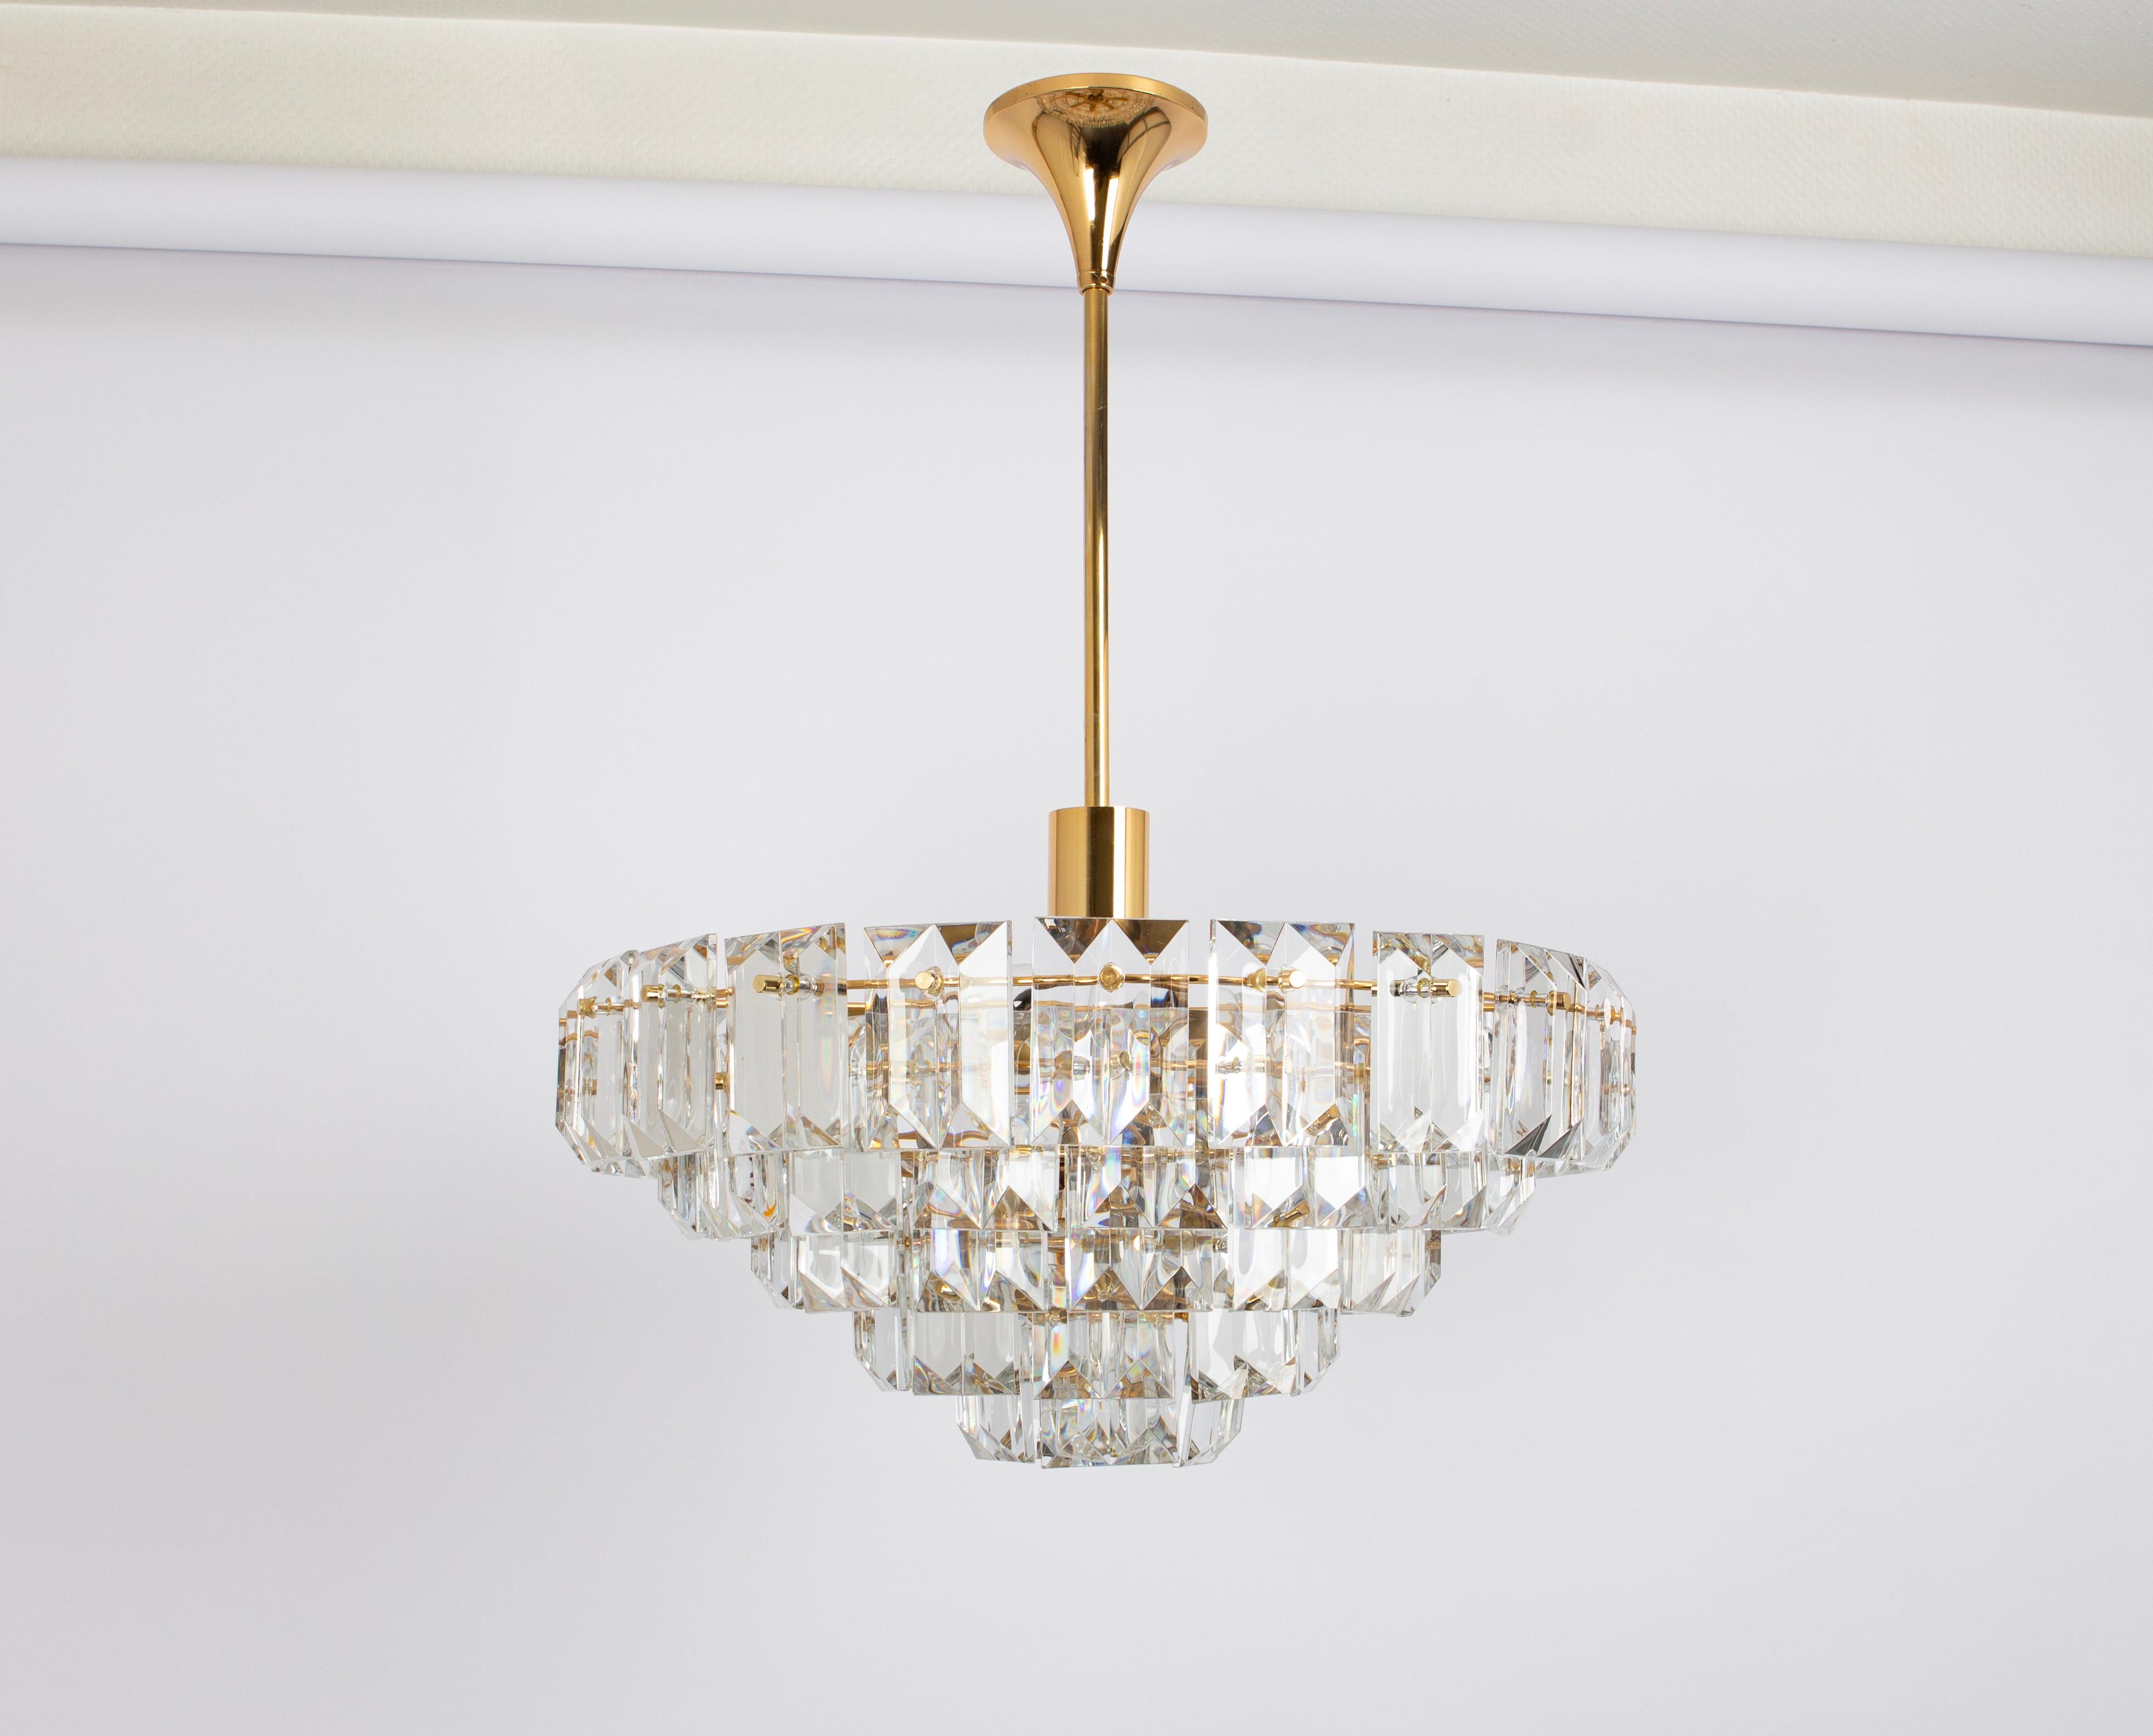 A stunning chandelier by Kinkeldey, Germany, manufactured in circa 1970-1979. A handmade and high quality piece. The ceiling fixture and the frame are made of brass and have rings with lots of facetted crystal glass elements.

Heavy quality and in